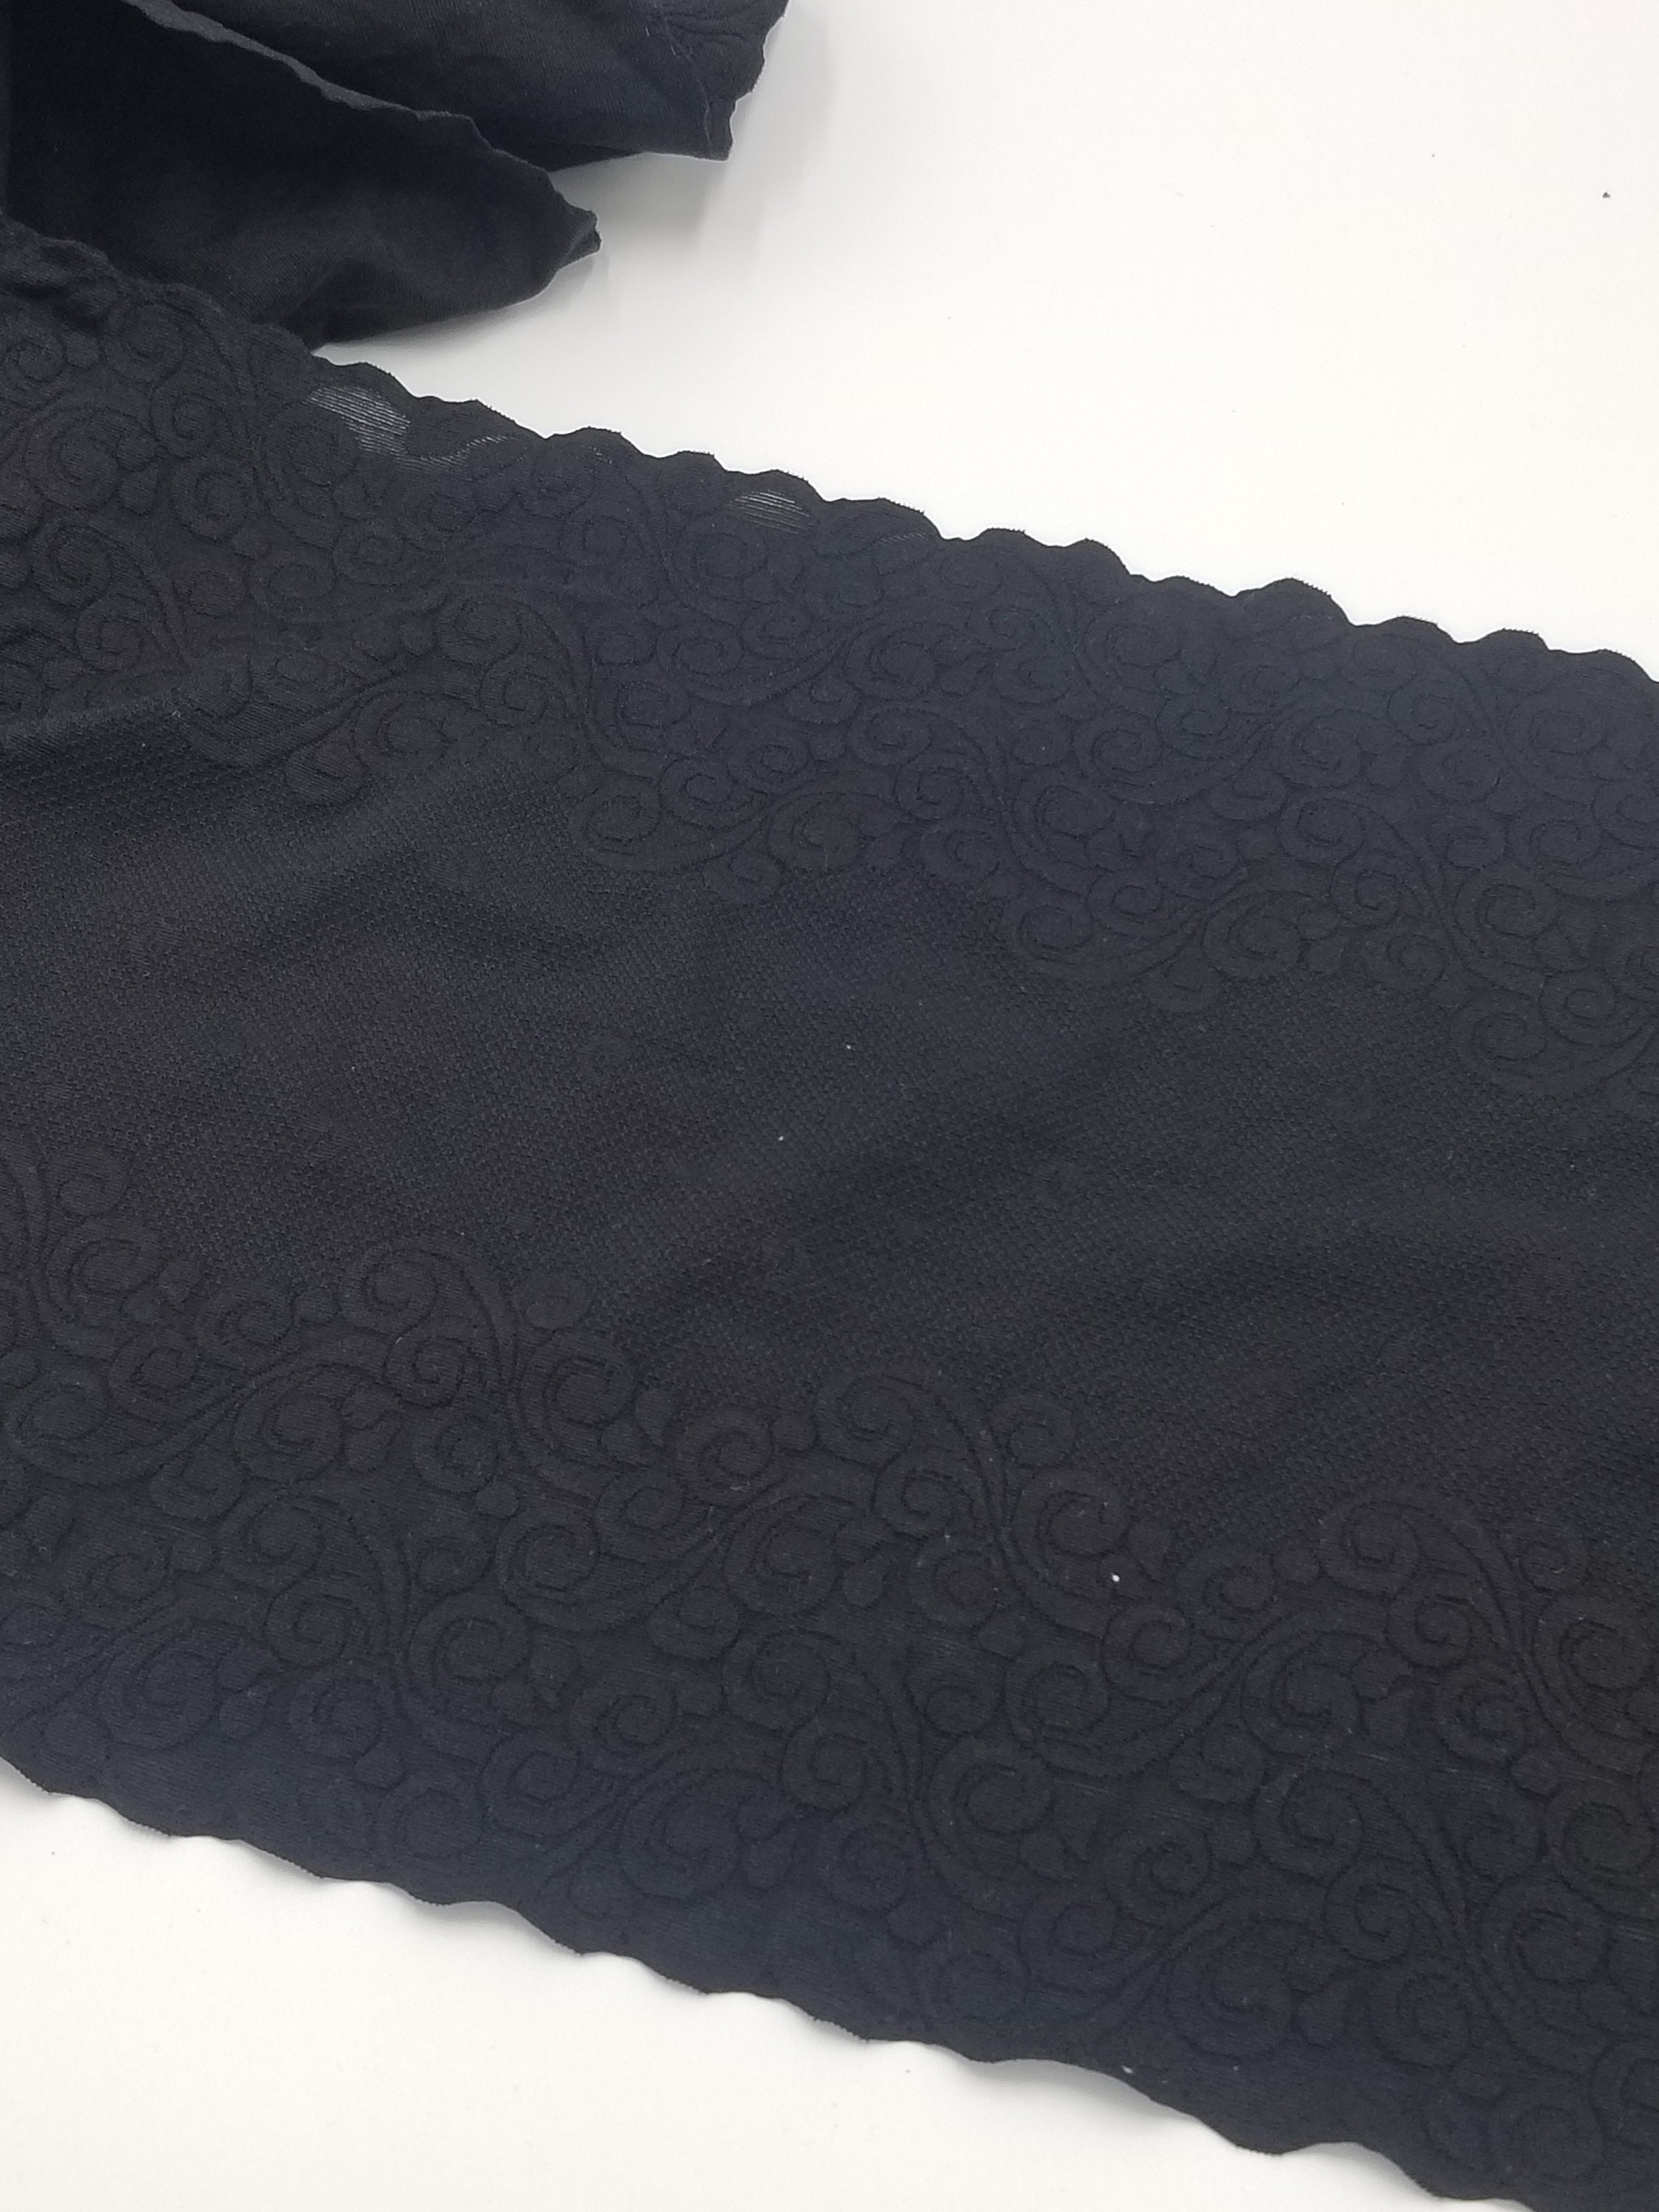 Stretch Black Lace Trim Opaque Scroll Fabric 12 inches Wide | Etsy